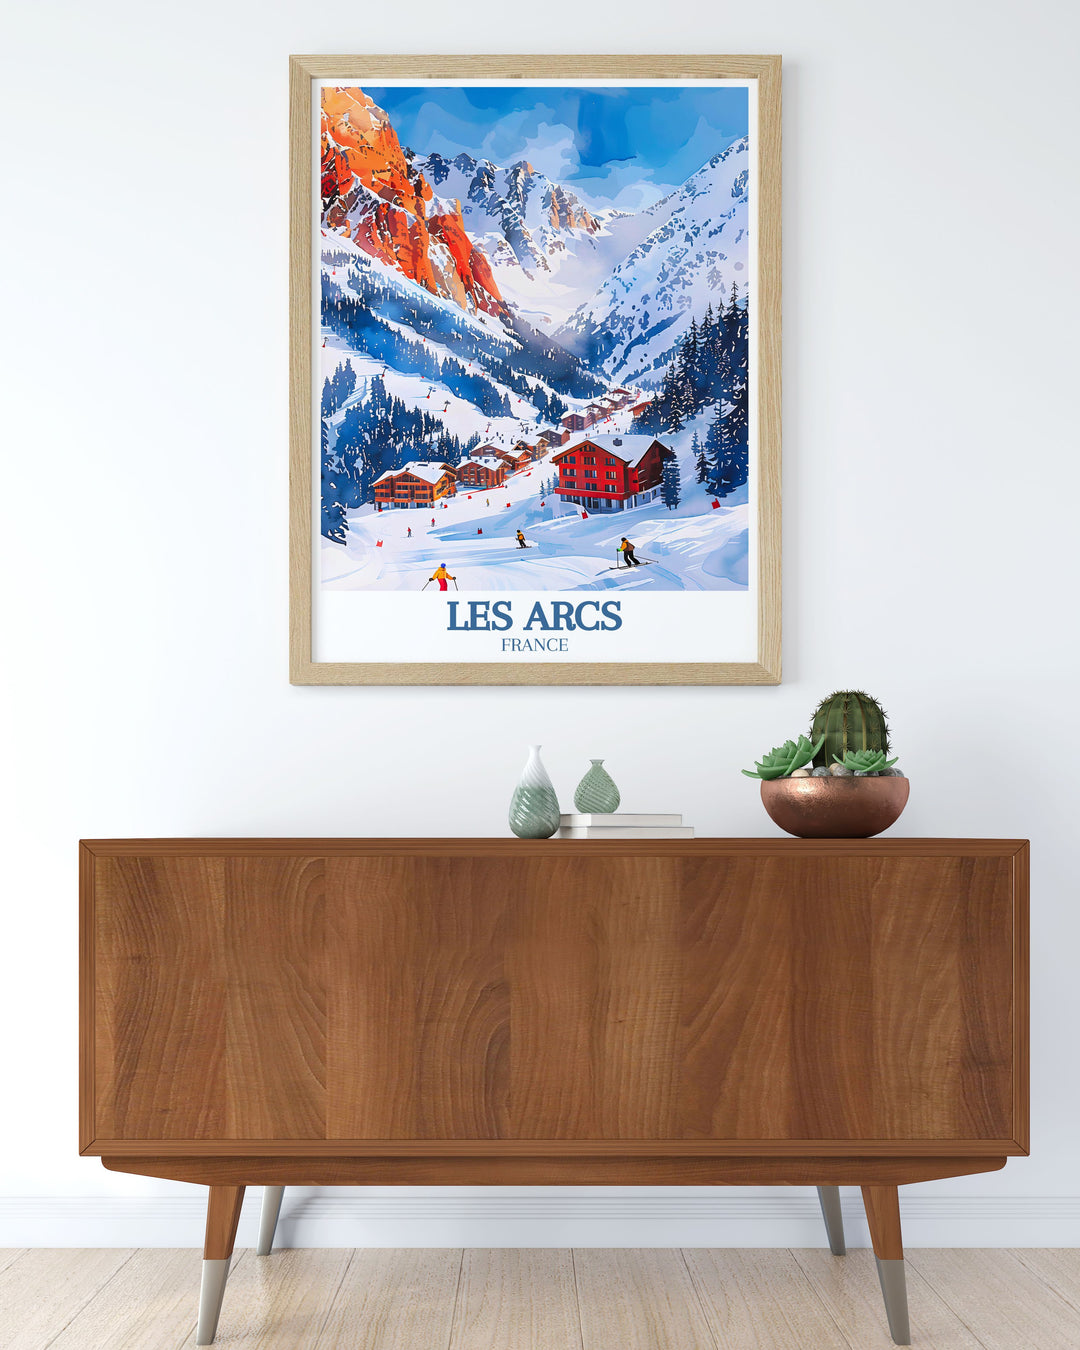 Beautiful Les Arcs print featuring Aiguille Rouge Mont Blanc perfect wall decor for any room bringing the thrill and beauty of skiing into your home